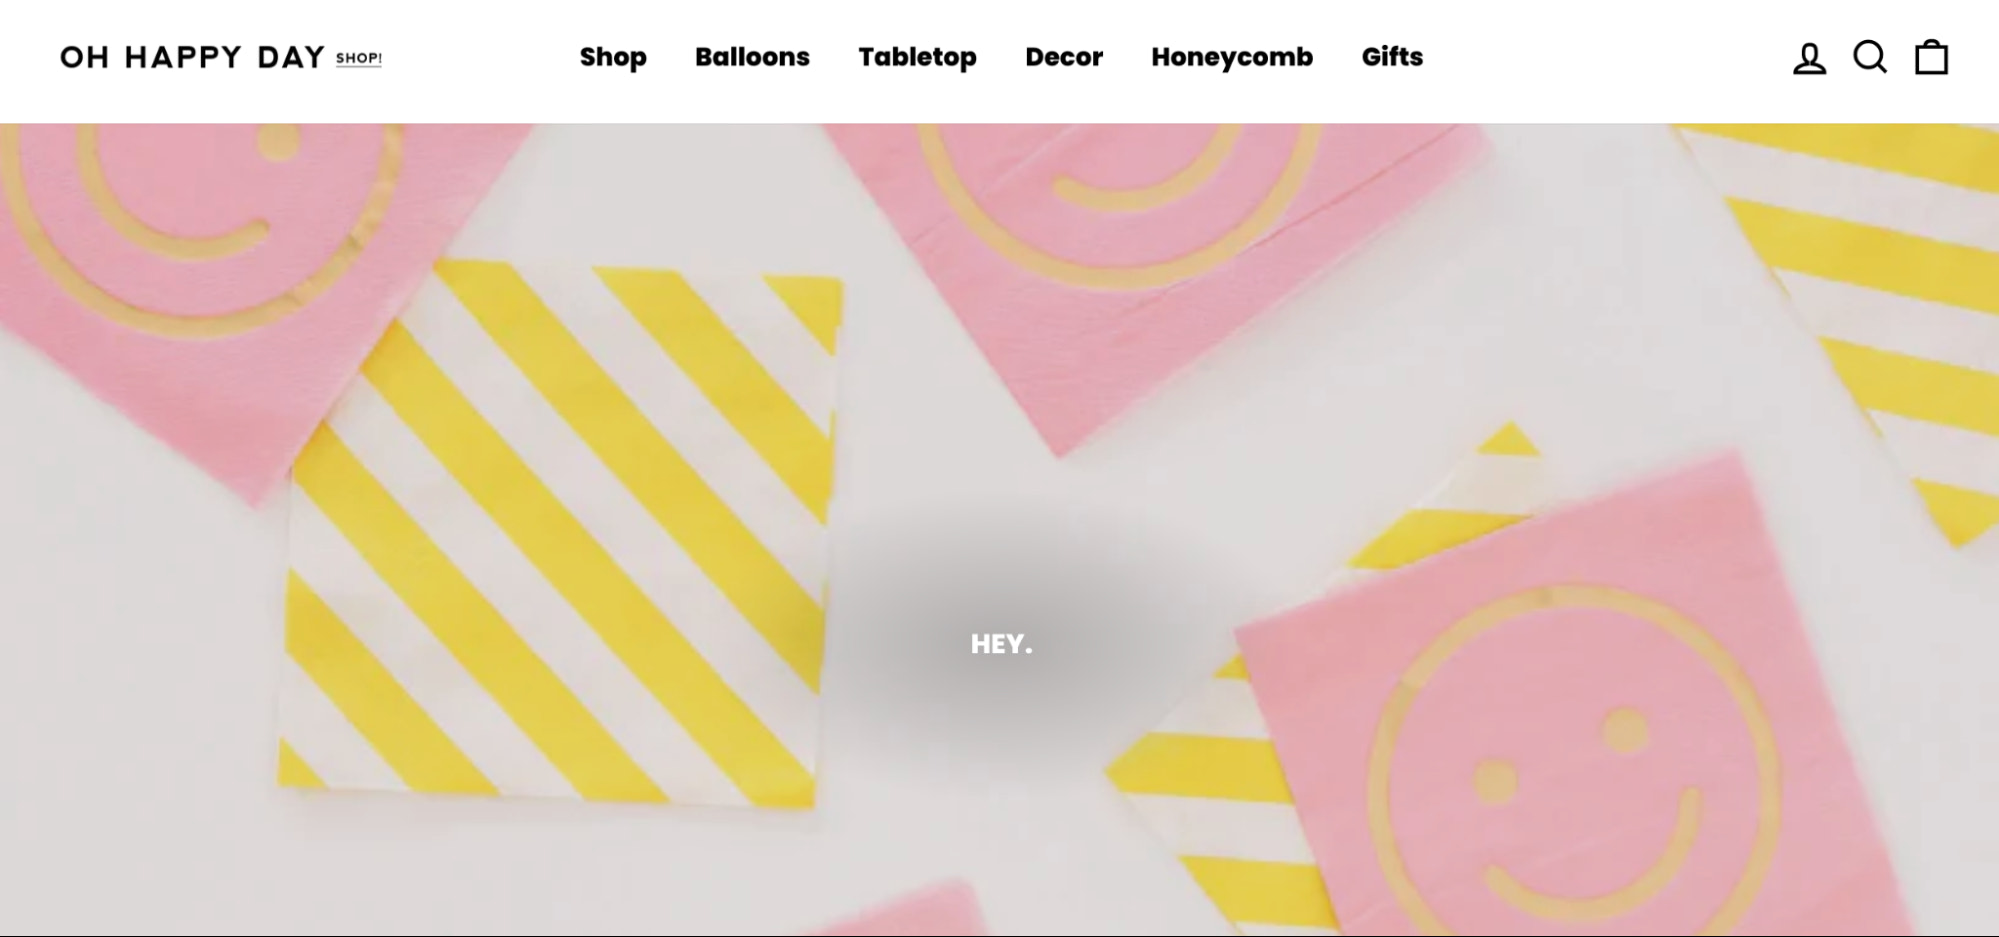 Screenshot of Oh Happy Day Shop! homepage